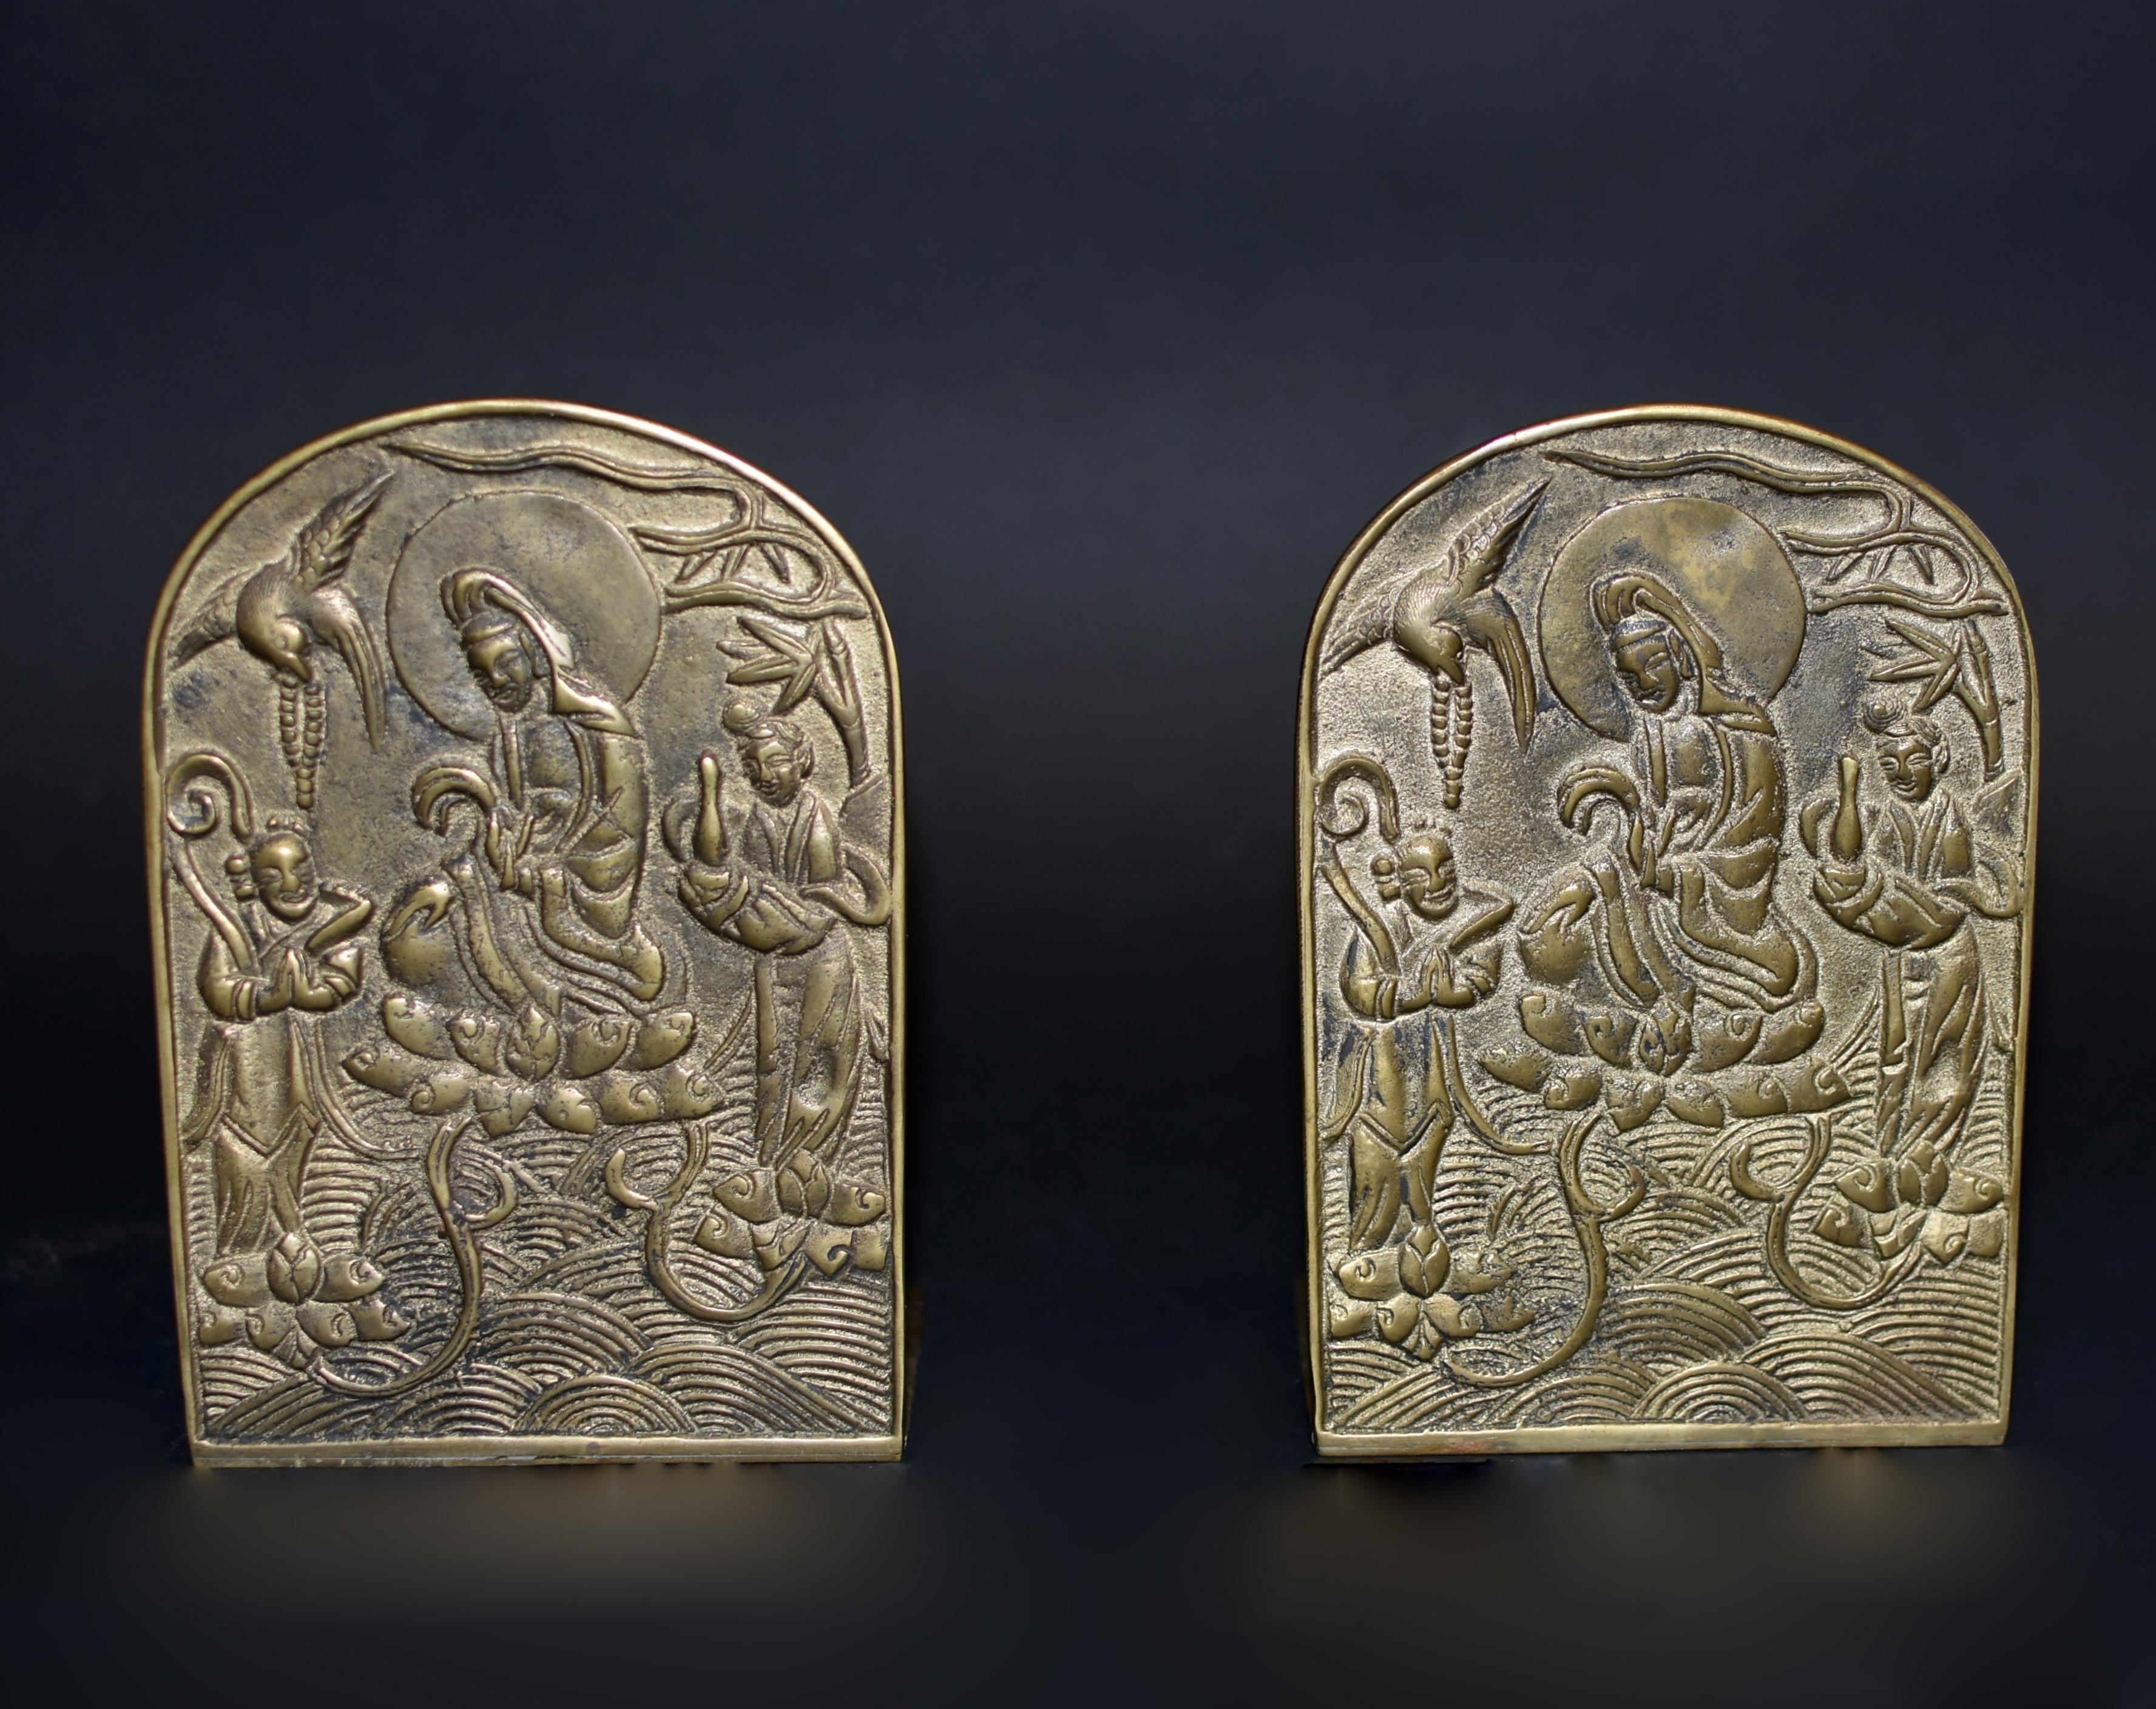 A pair of solid brass bookends depict Guan Yin, Goddess of Great Compassion. Seated on lotus throne, holding a willow branch, Guan Yin is in the action of providing blessings. A female disciple to her left holds a bottle that contains holy water. A